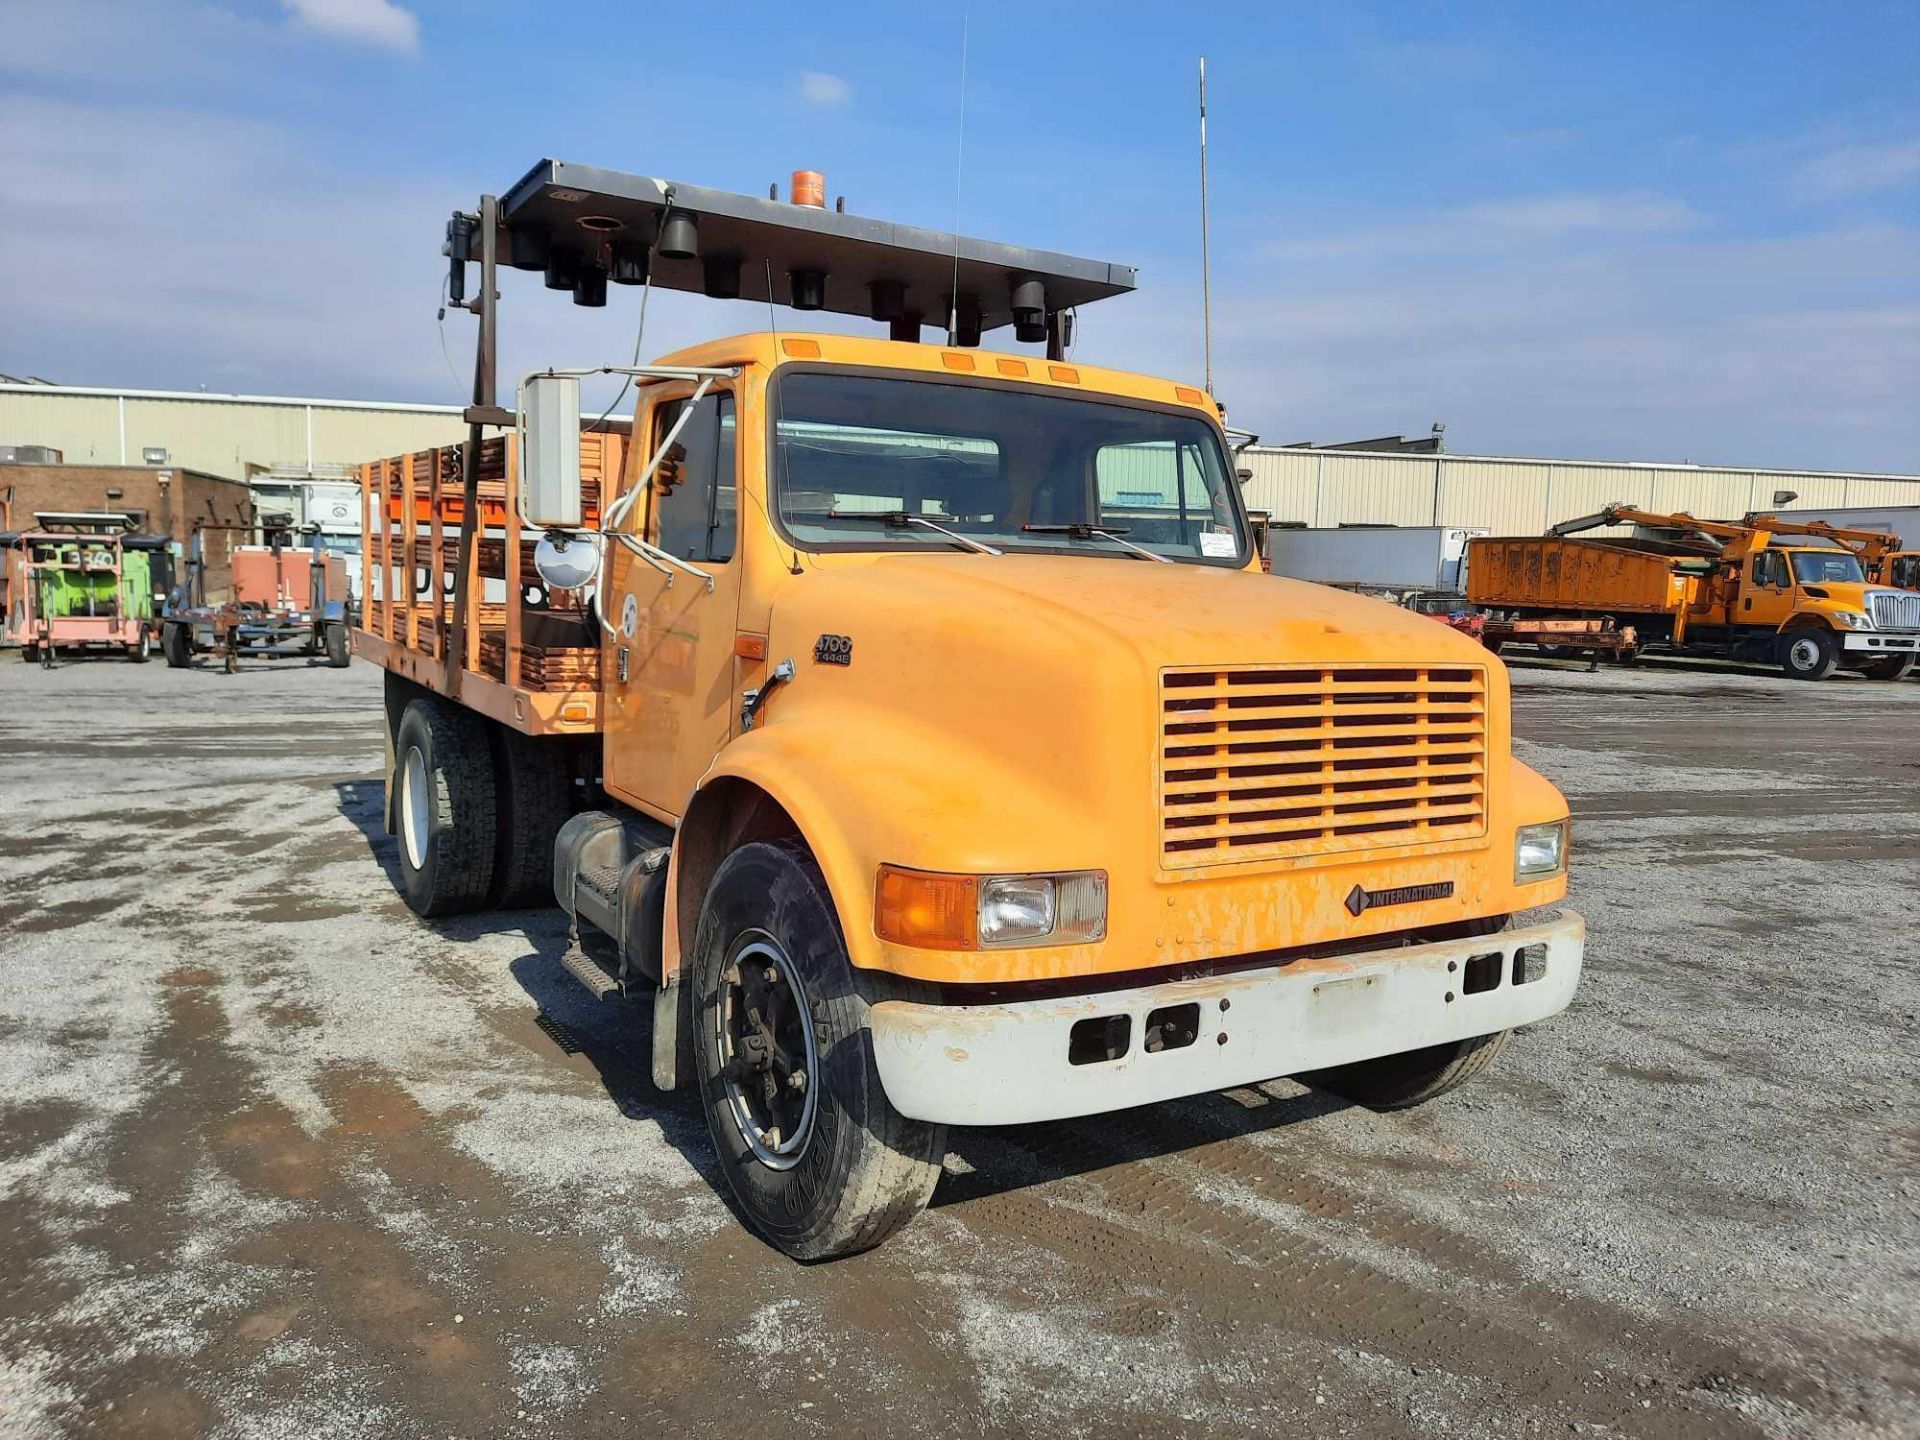 1996 INTL. 4700 STAKEBODY W/ ARROW BOARD TRUCK (VDOT UNIT #: R02715) - Image 4 of 16